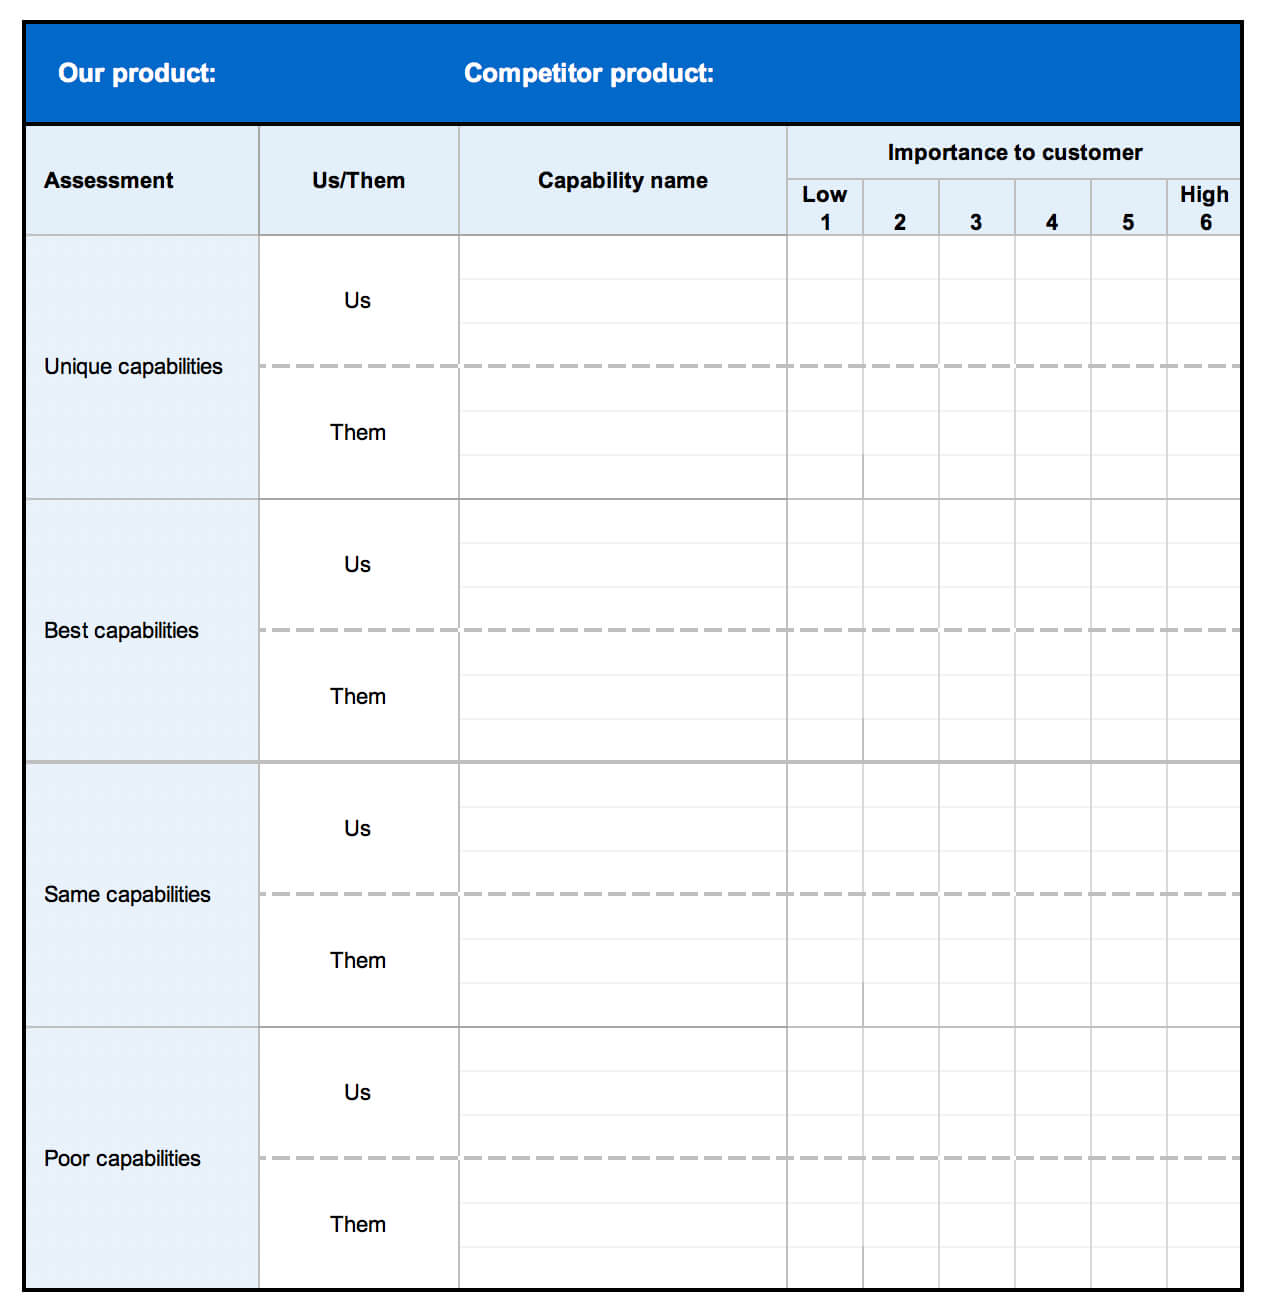 Free Strategy And Competitor Analysis Templates | Aha! Within Business Value Assessment Template